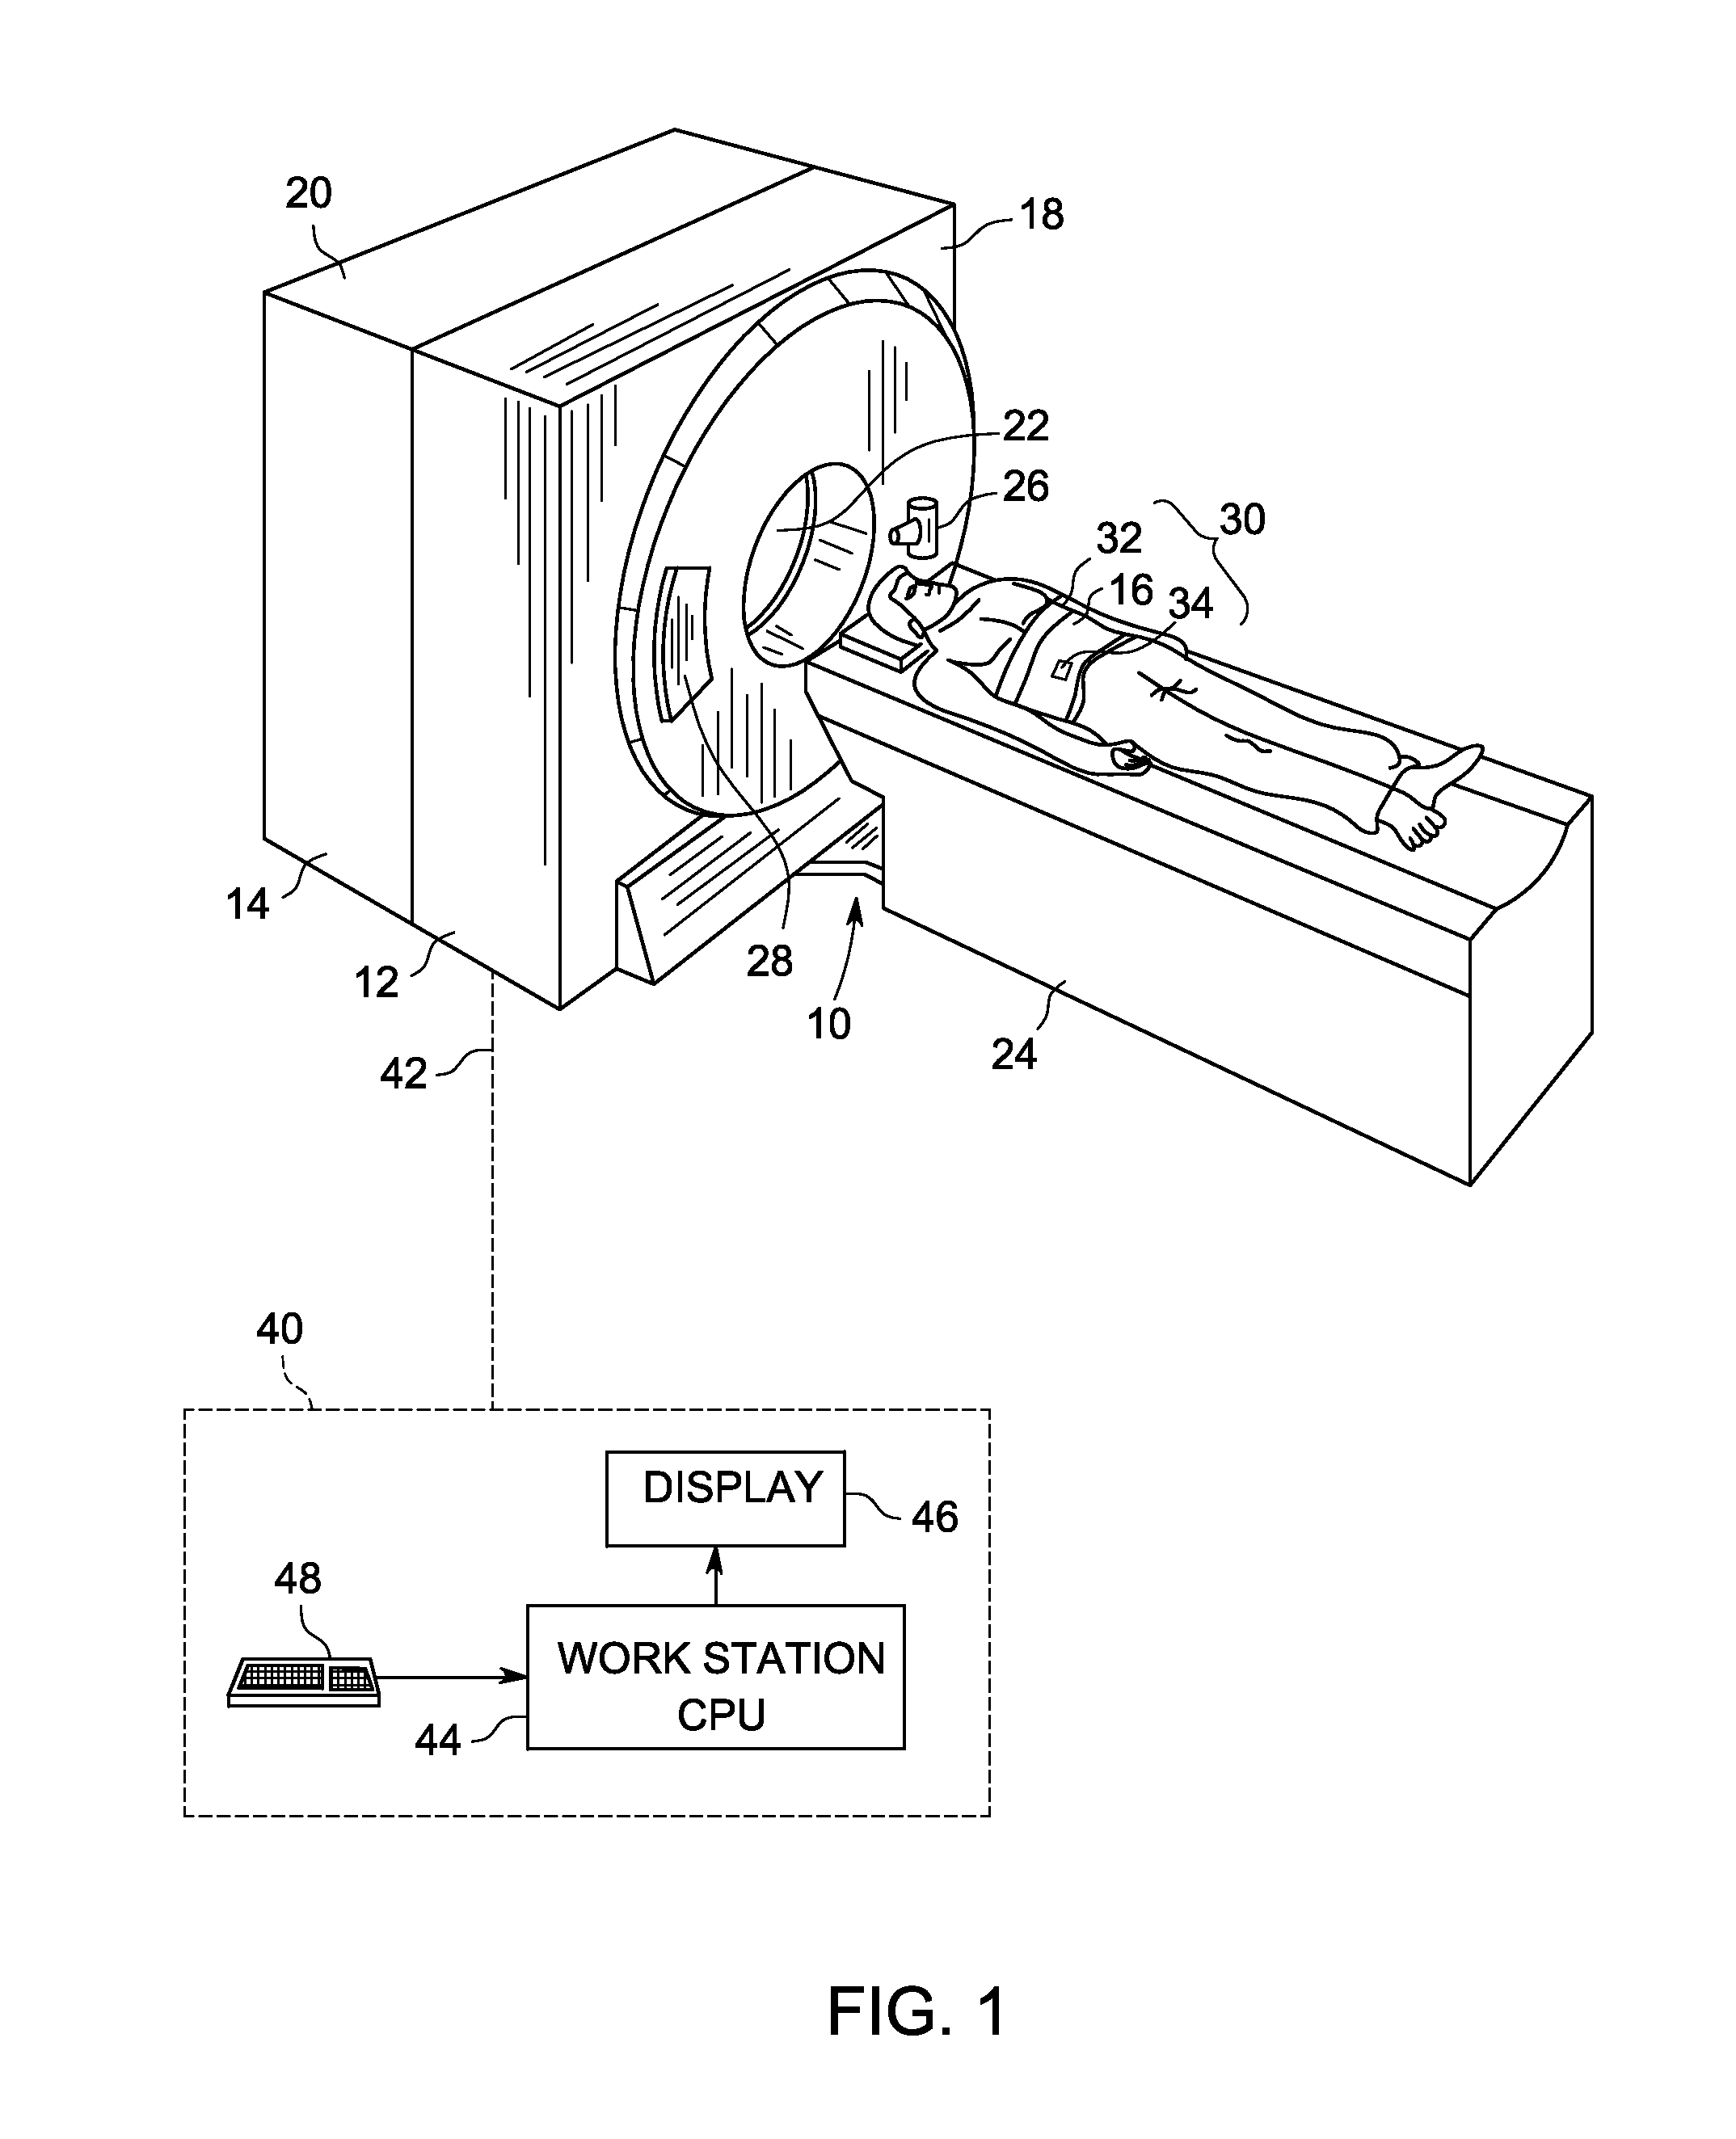 Method and apparatus for generating medical images